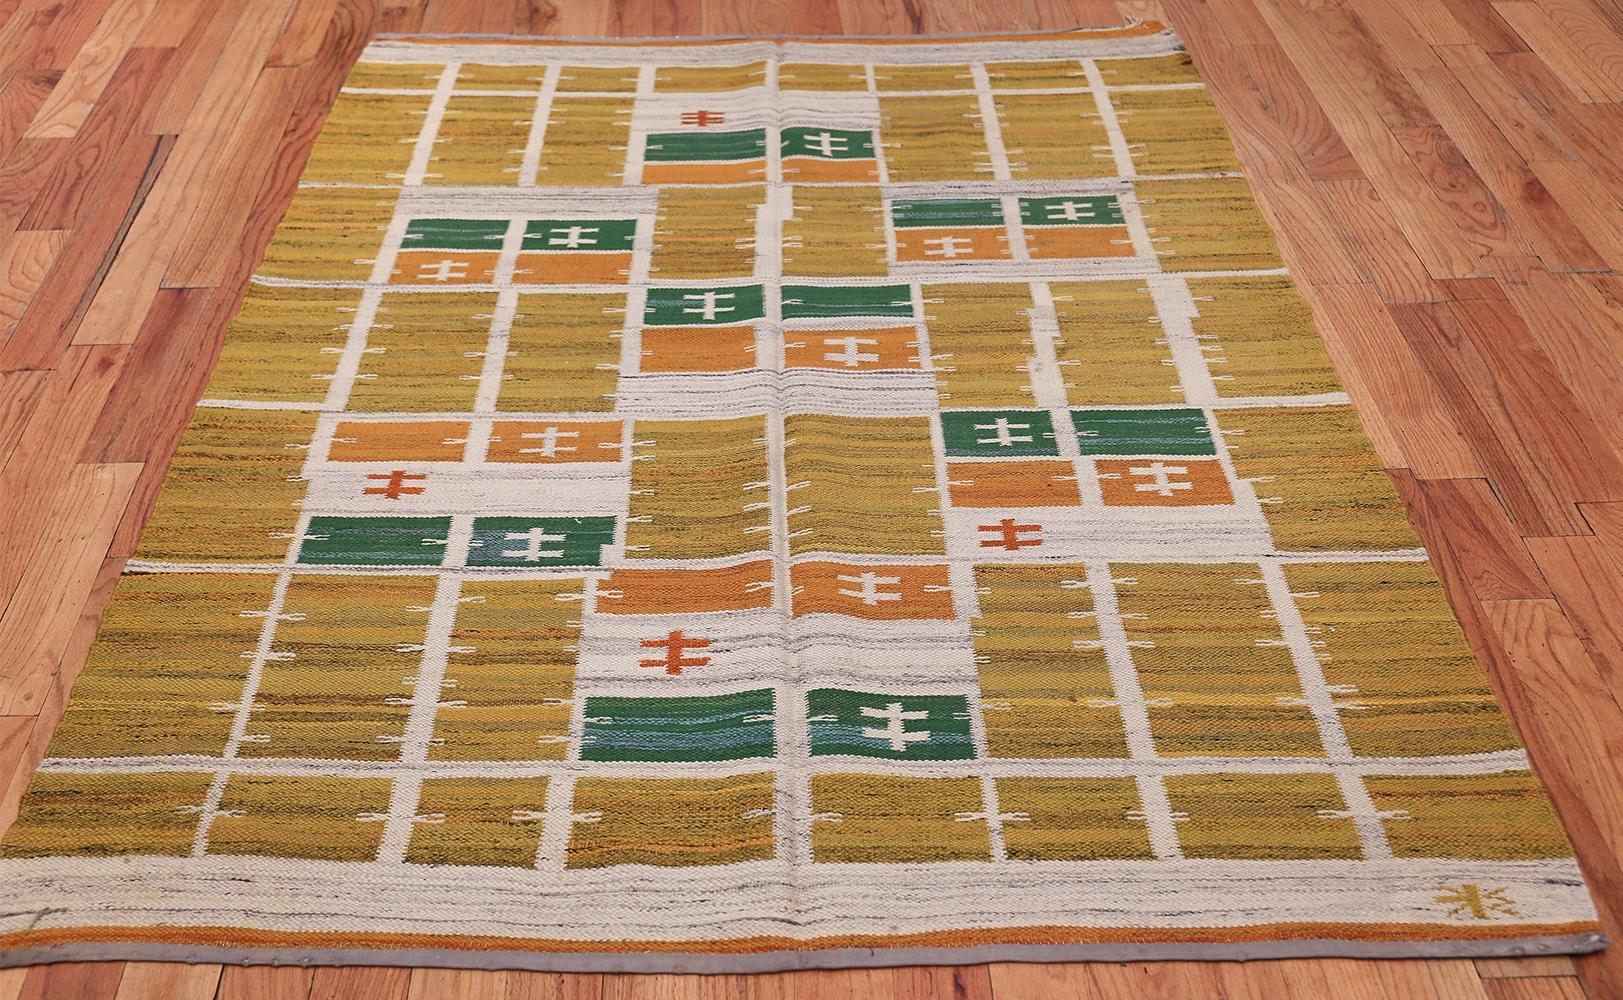 Wool Vintage Scandinavian Gold Rug. Size: 4 ft 8 in x 6 ft 7 in (1.42 m x 2.01 m)